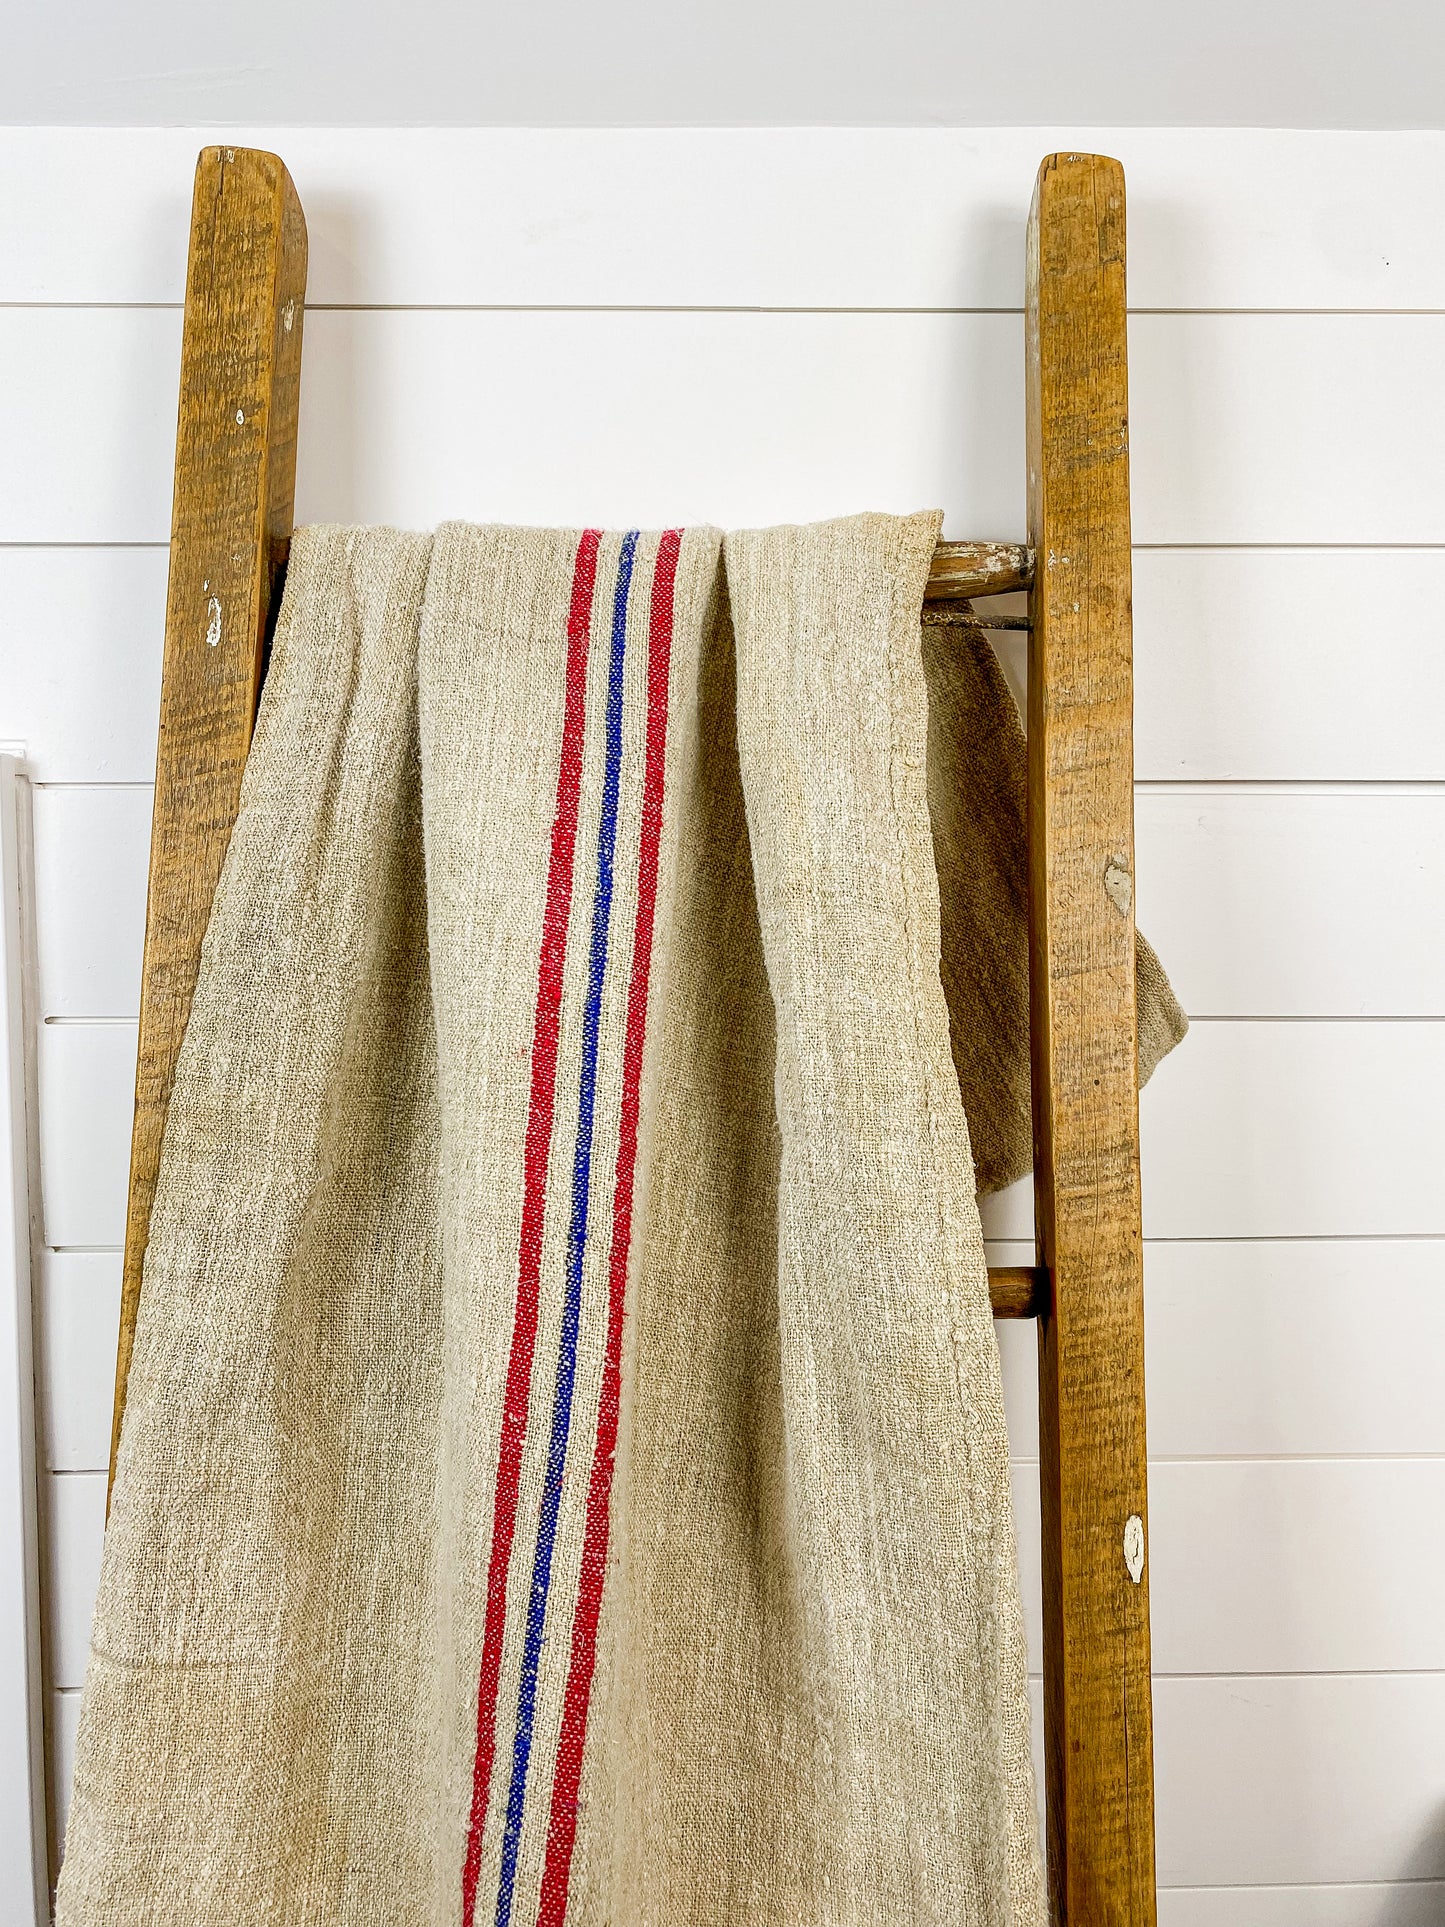 Antique Extra Large French Linen Grain Sack with Blue and Red Stripes, 51" x 22"